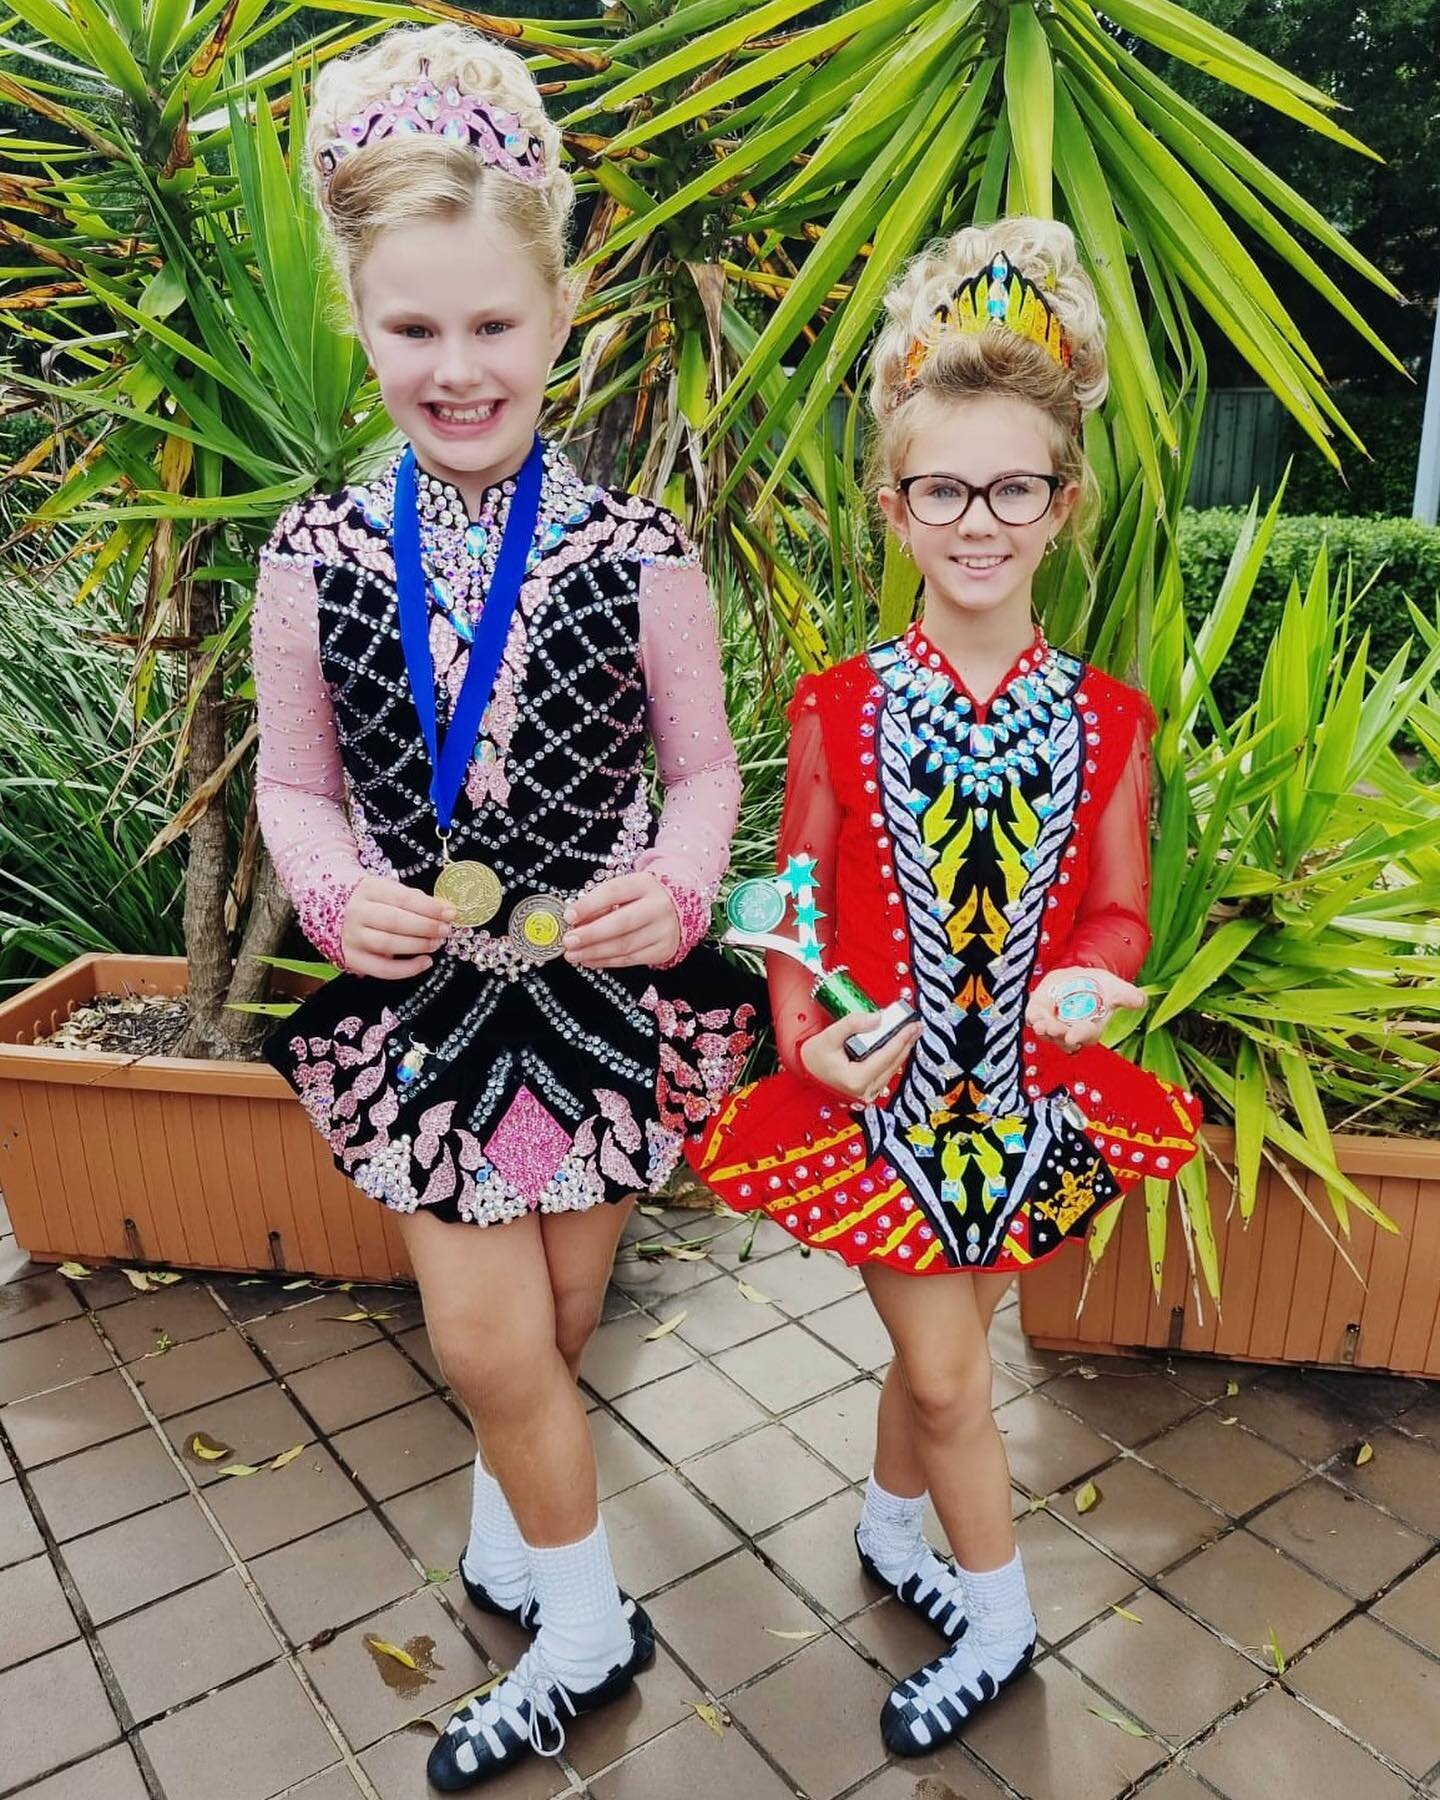 Smiles all round at the St Patrick&rsquo;s Day Feis!

🏅Sadbh - 2nd in the jig and trad set, 3rd in the Premiership
🏅Harper - 4th in the jig, Adjudicators Award in the Premiership
🏅Lucy - 1st in the trad set and hornpipe (upgraded to Intermediate!)